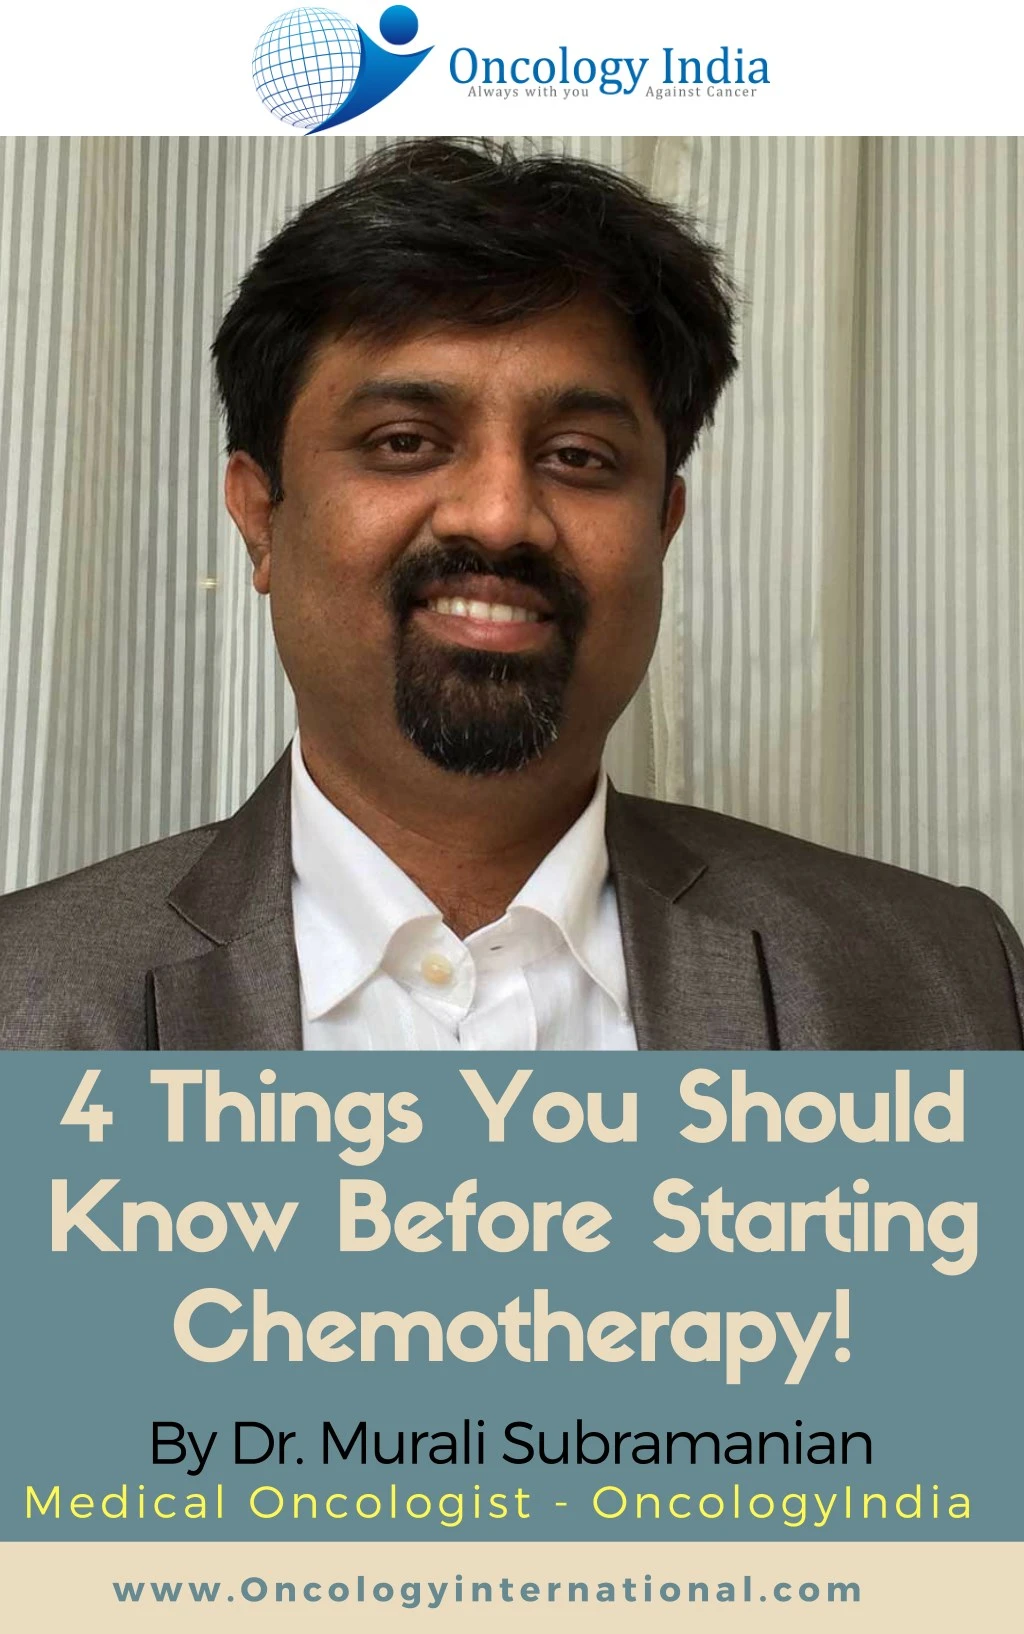 4 things you should know before starting